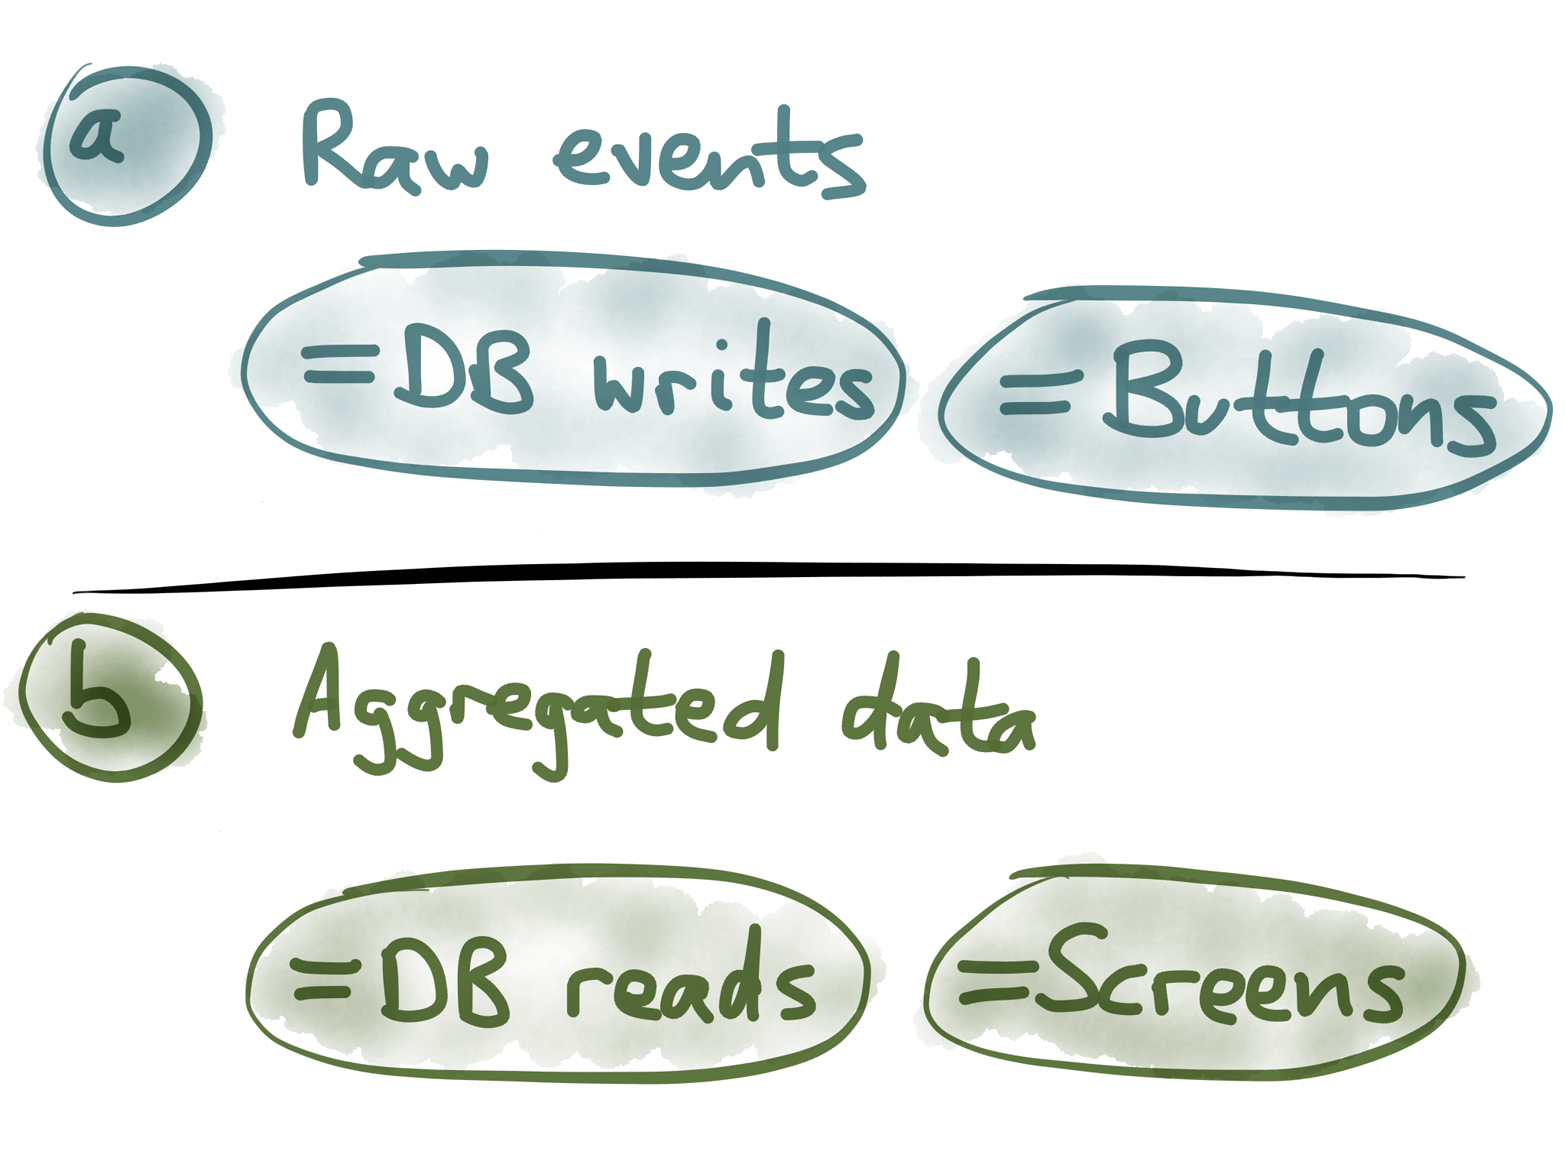 As a rule of thumb, clicking a button causes an event to be written, and what a user sees on their screen corresponds to aggregated data that is read.